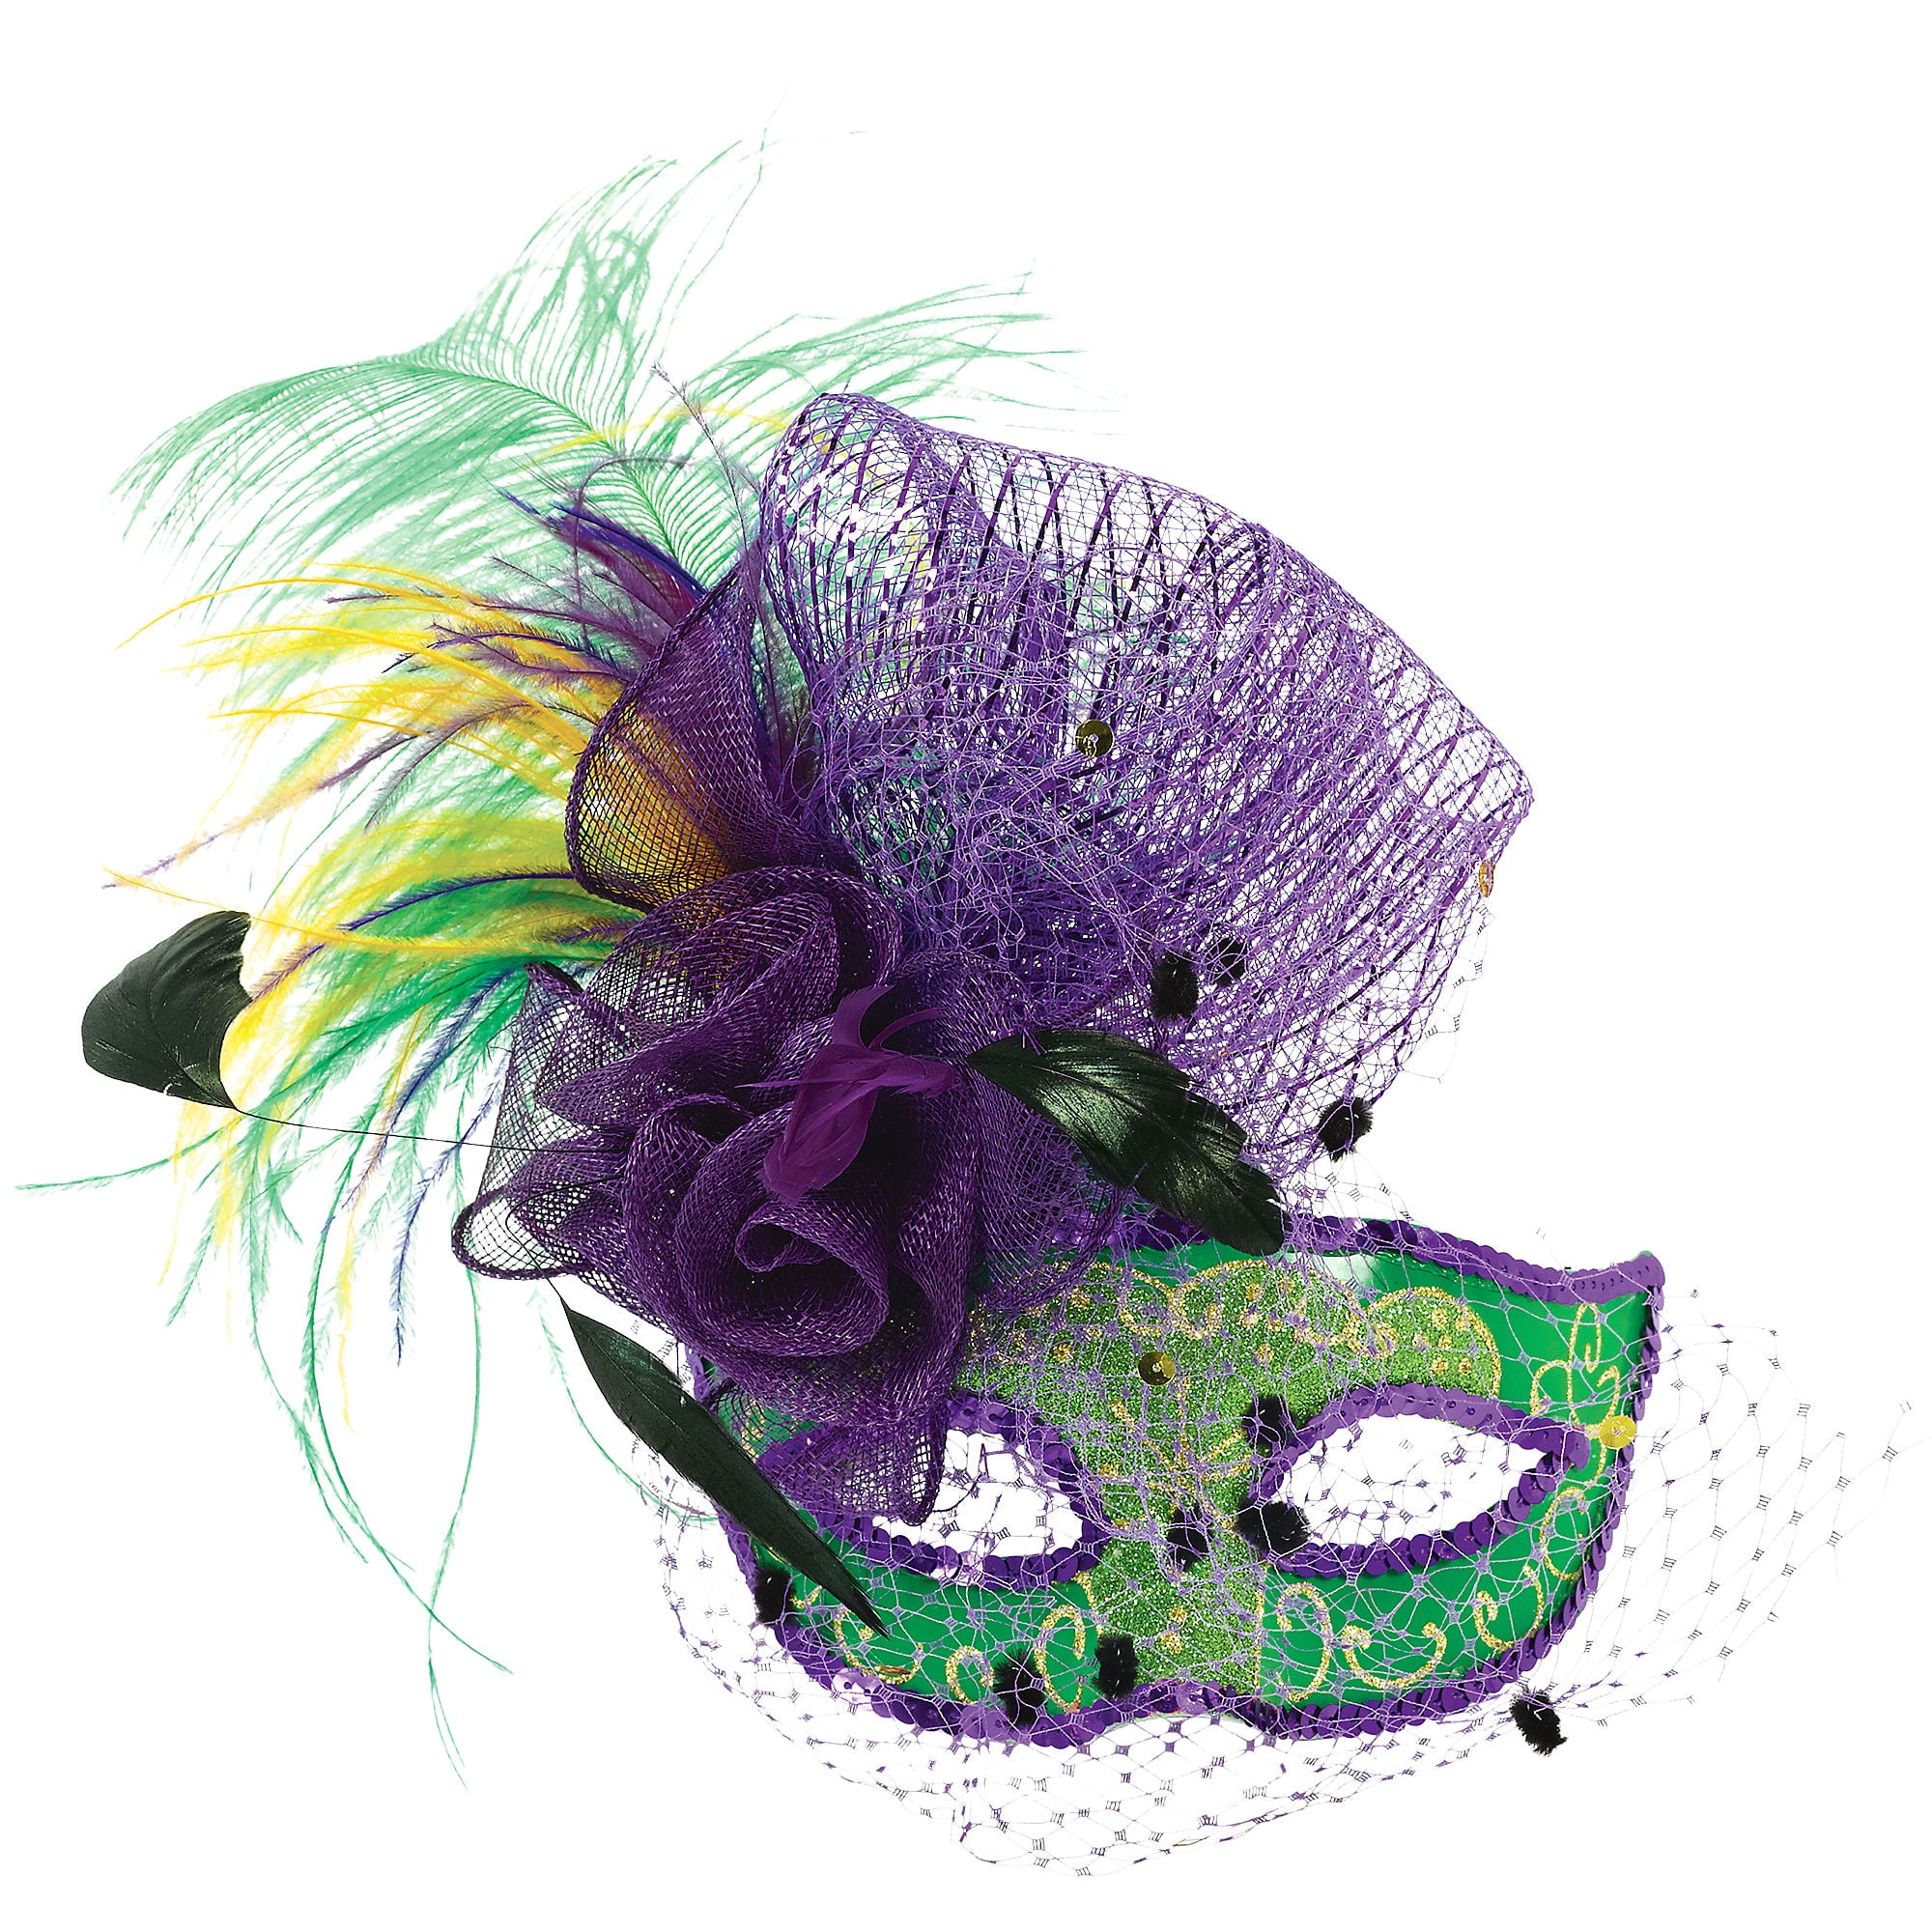 Mardi Gras Masquerades Mask Purple Leopard Print Glitter Iron-on Stickers  for Clothes Cheap Easy to Use DIY Decoration - AliExpress